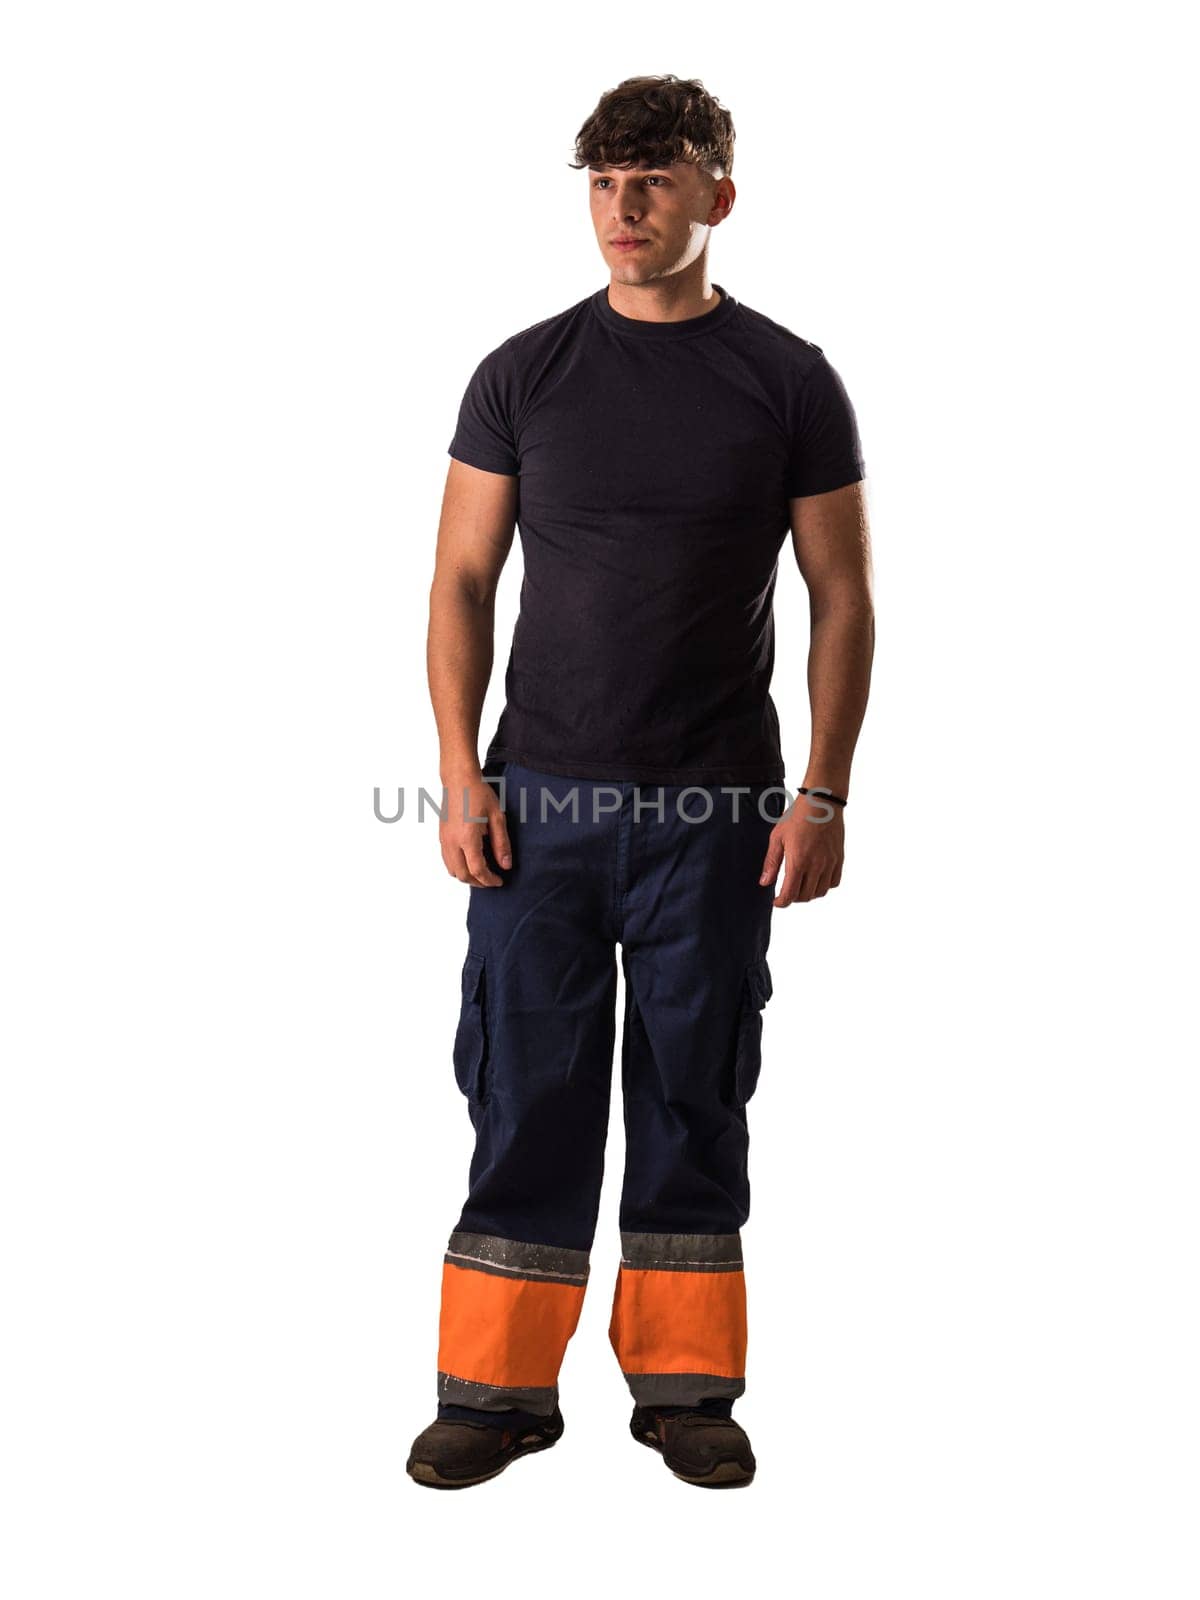 A young man wearing a worker overalls, isolated on white in studio shot. Full length